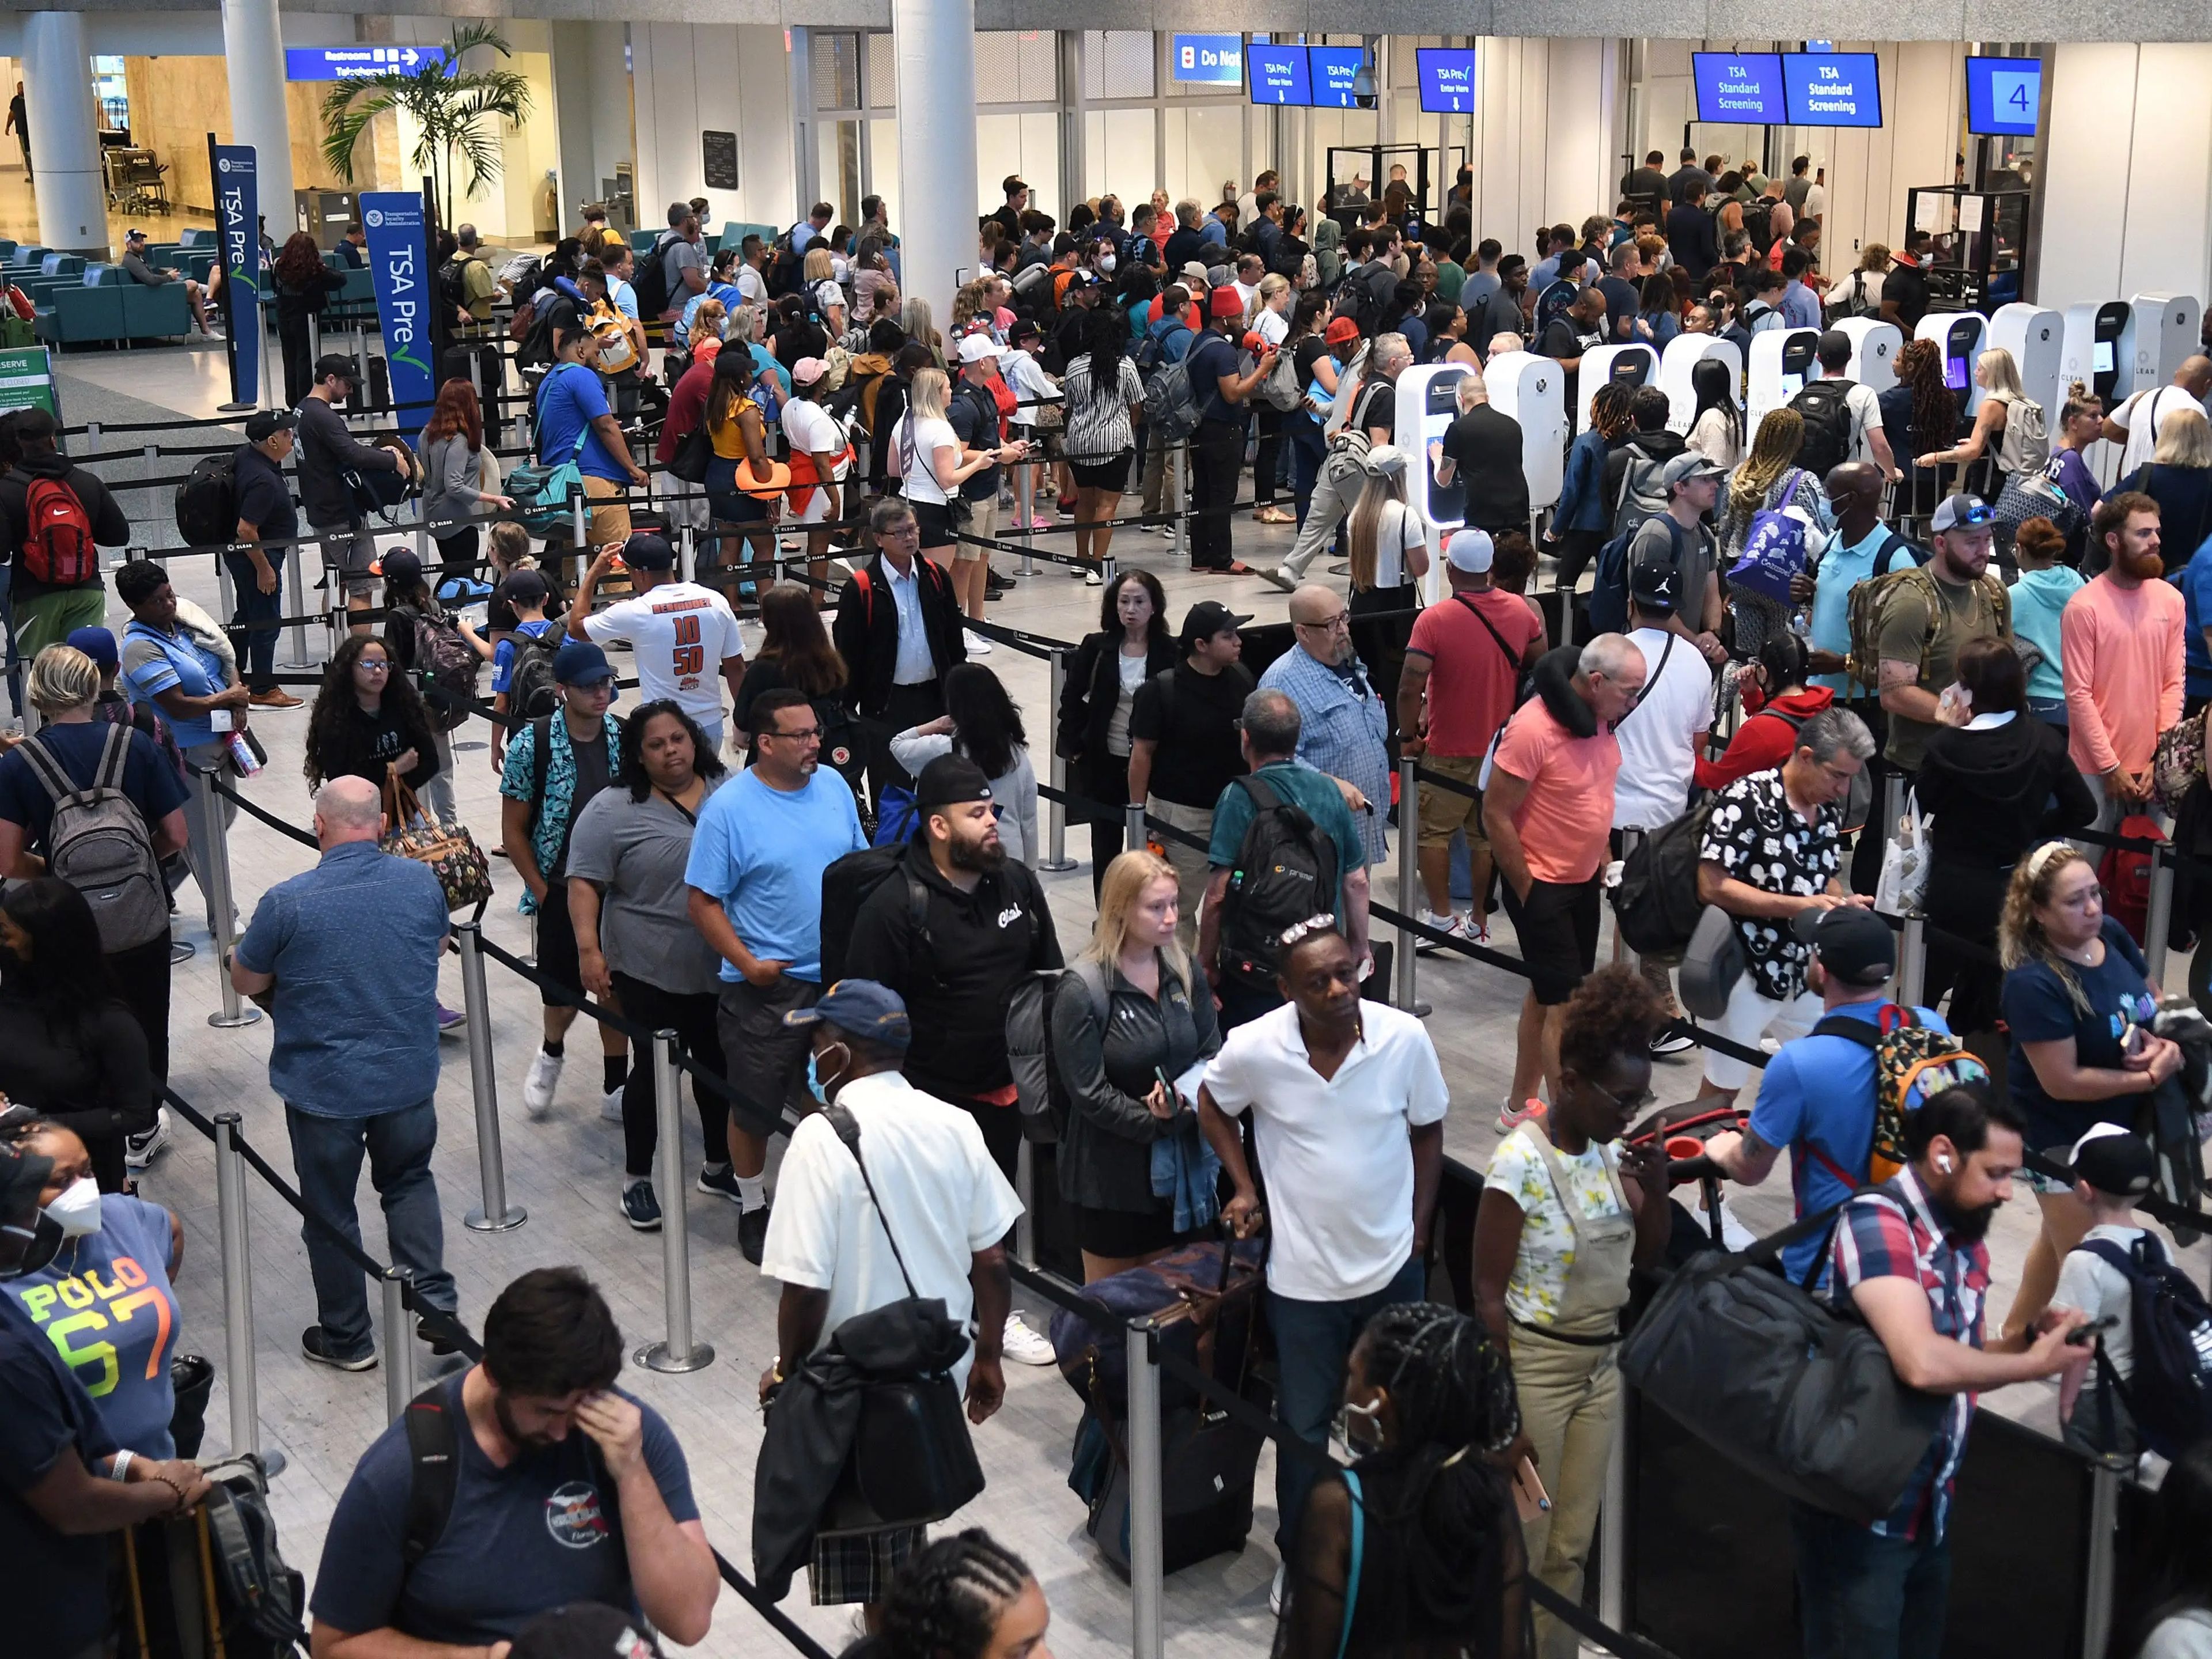 A long line of travelers make their way through a TSA screening line at Orlando International Airport ahead of the July 4 holiday.